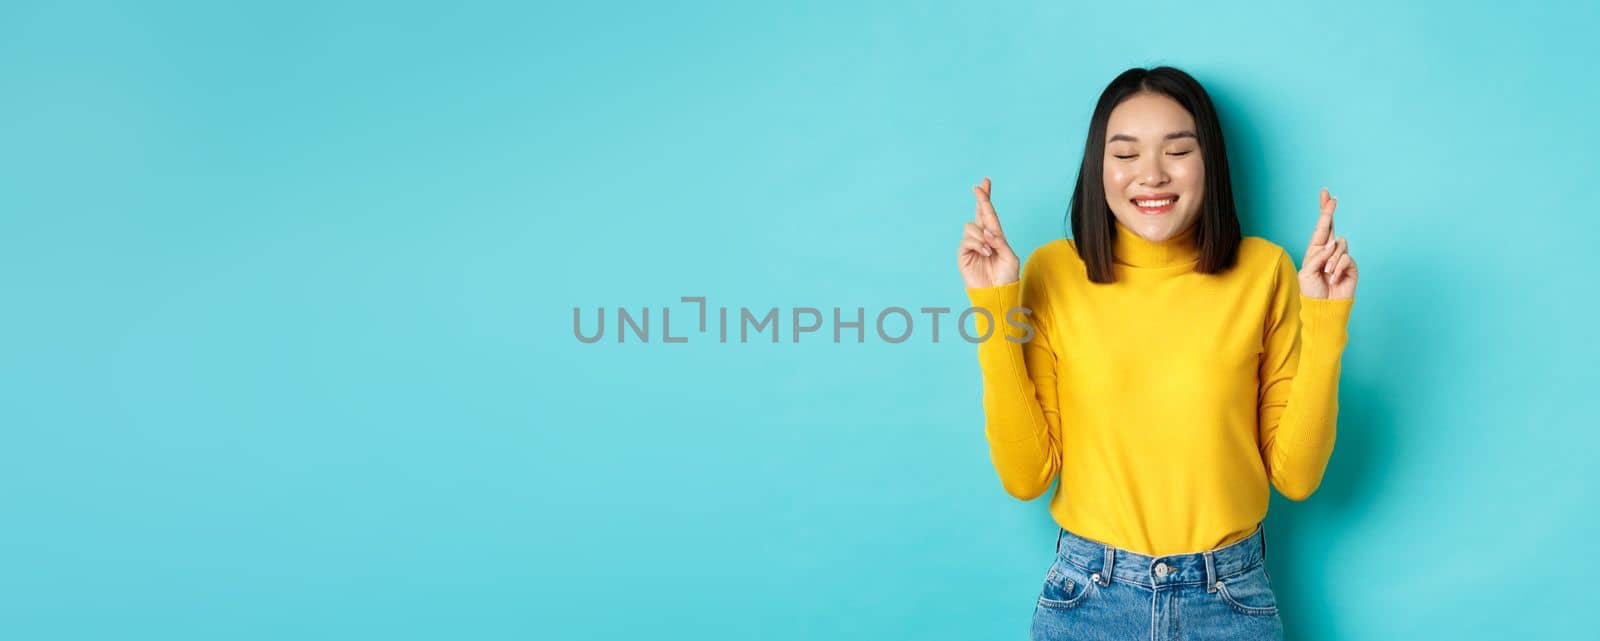 Hopeful asian woman dreaming, cross fingers for good luck and making wish, praying or supplicating, smiling with closed eyes, standing over blue background.